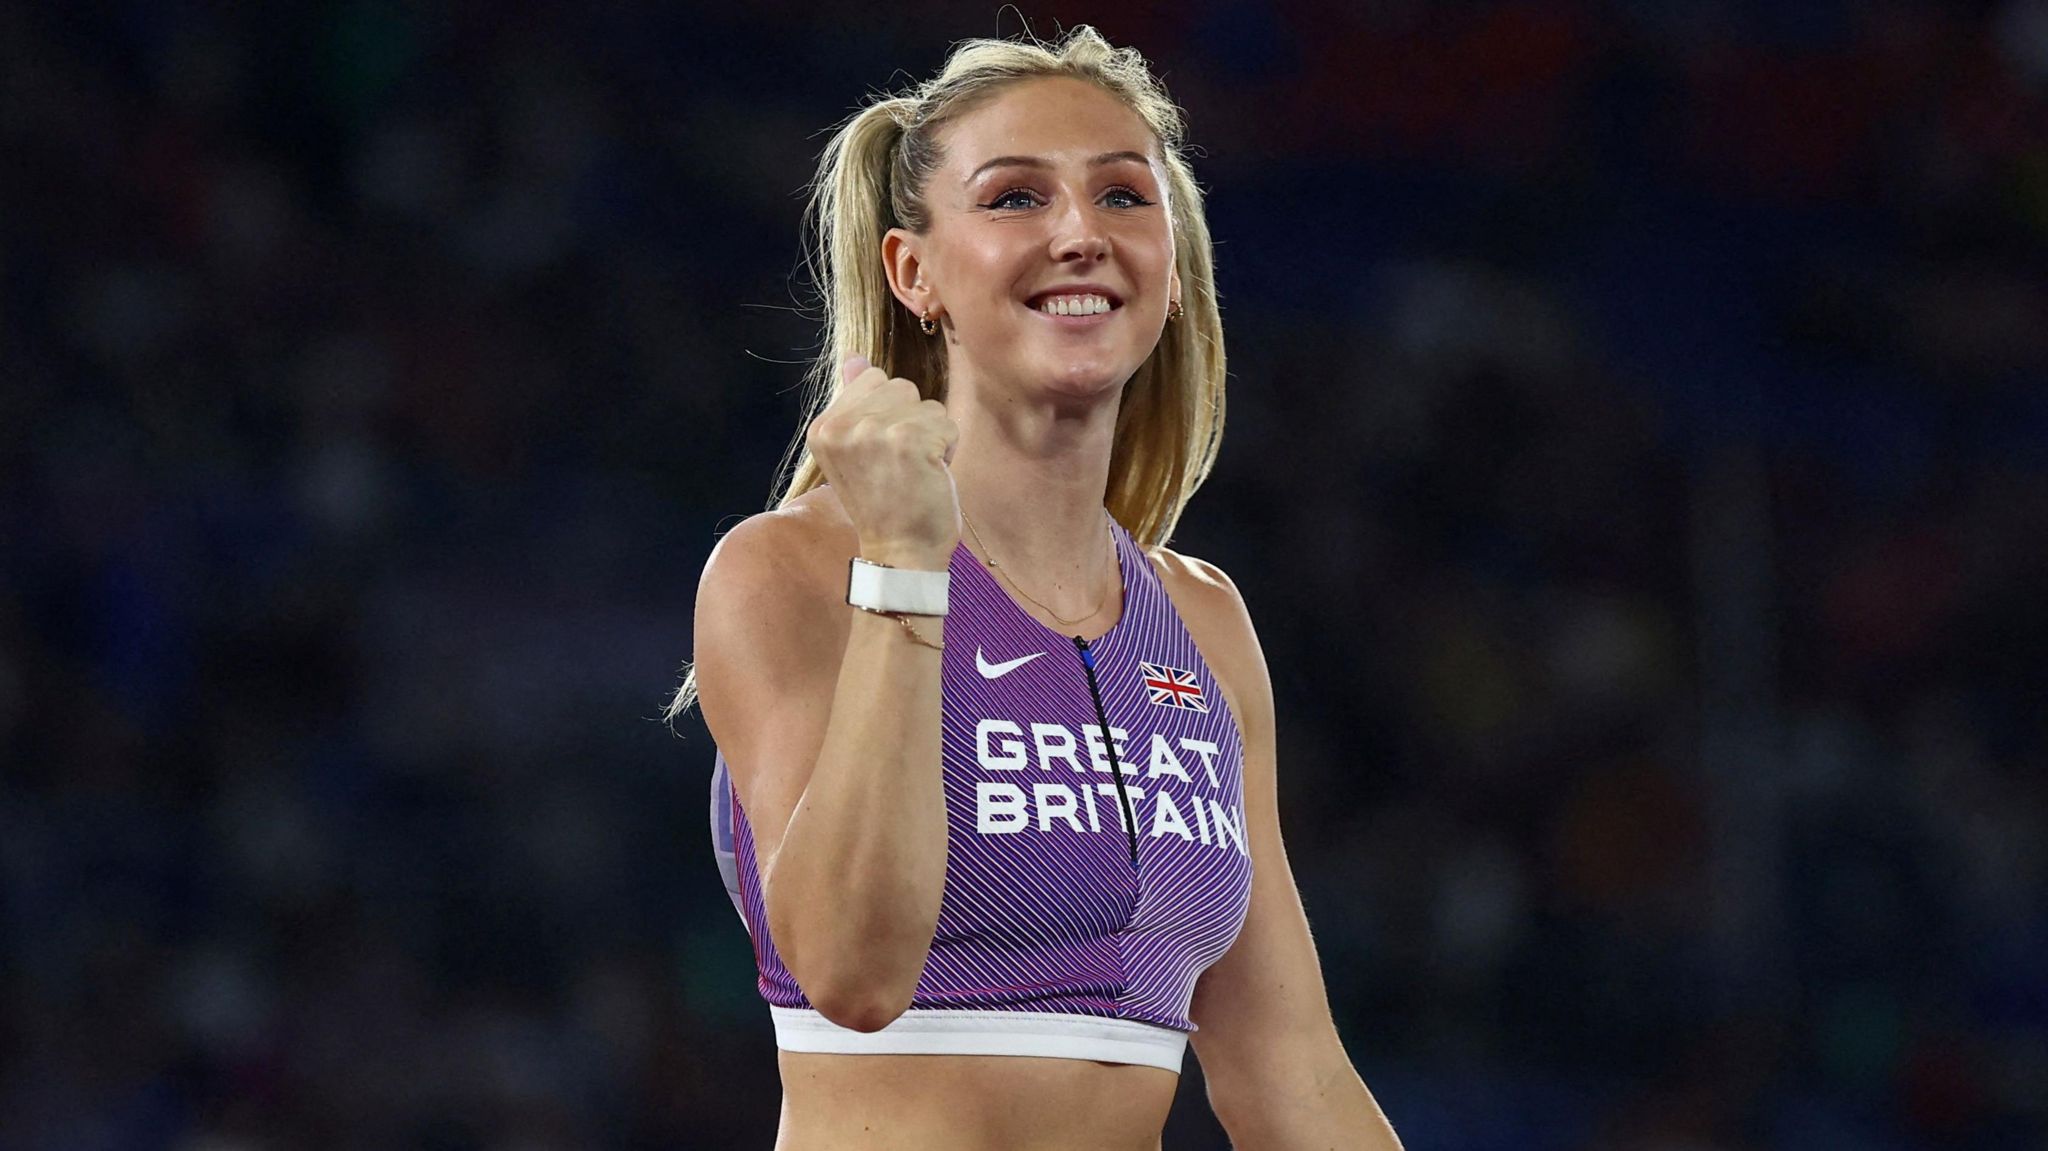 Molly Caudery celebrates with a clenched fist while competing for Great Britain